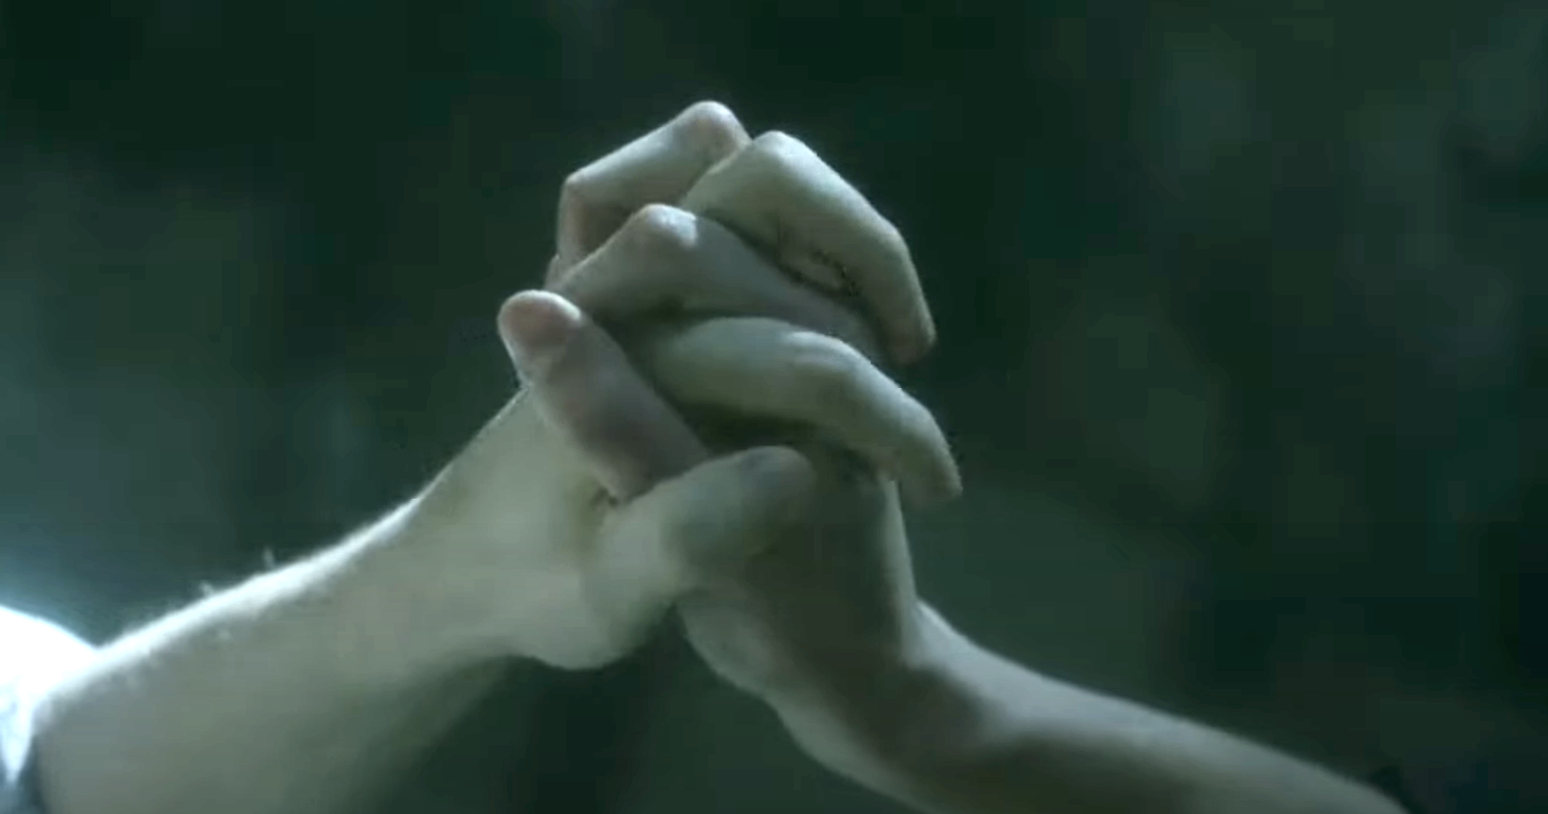 Dumbledore and Grindelwald holding hands